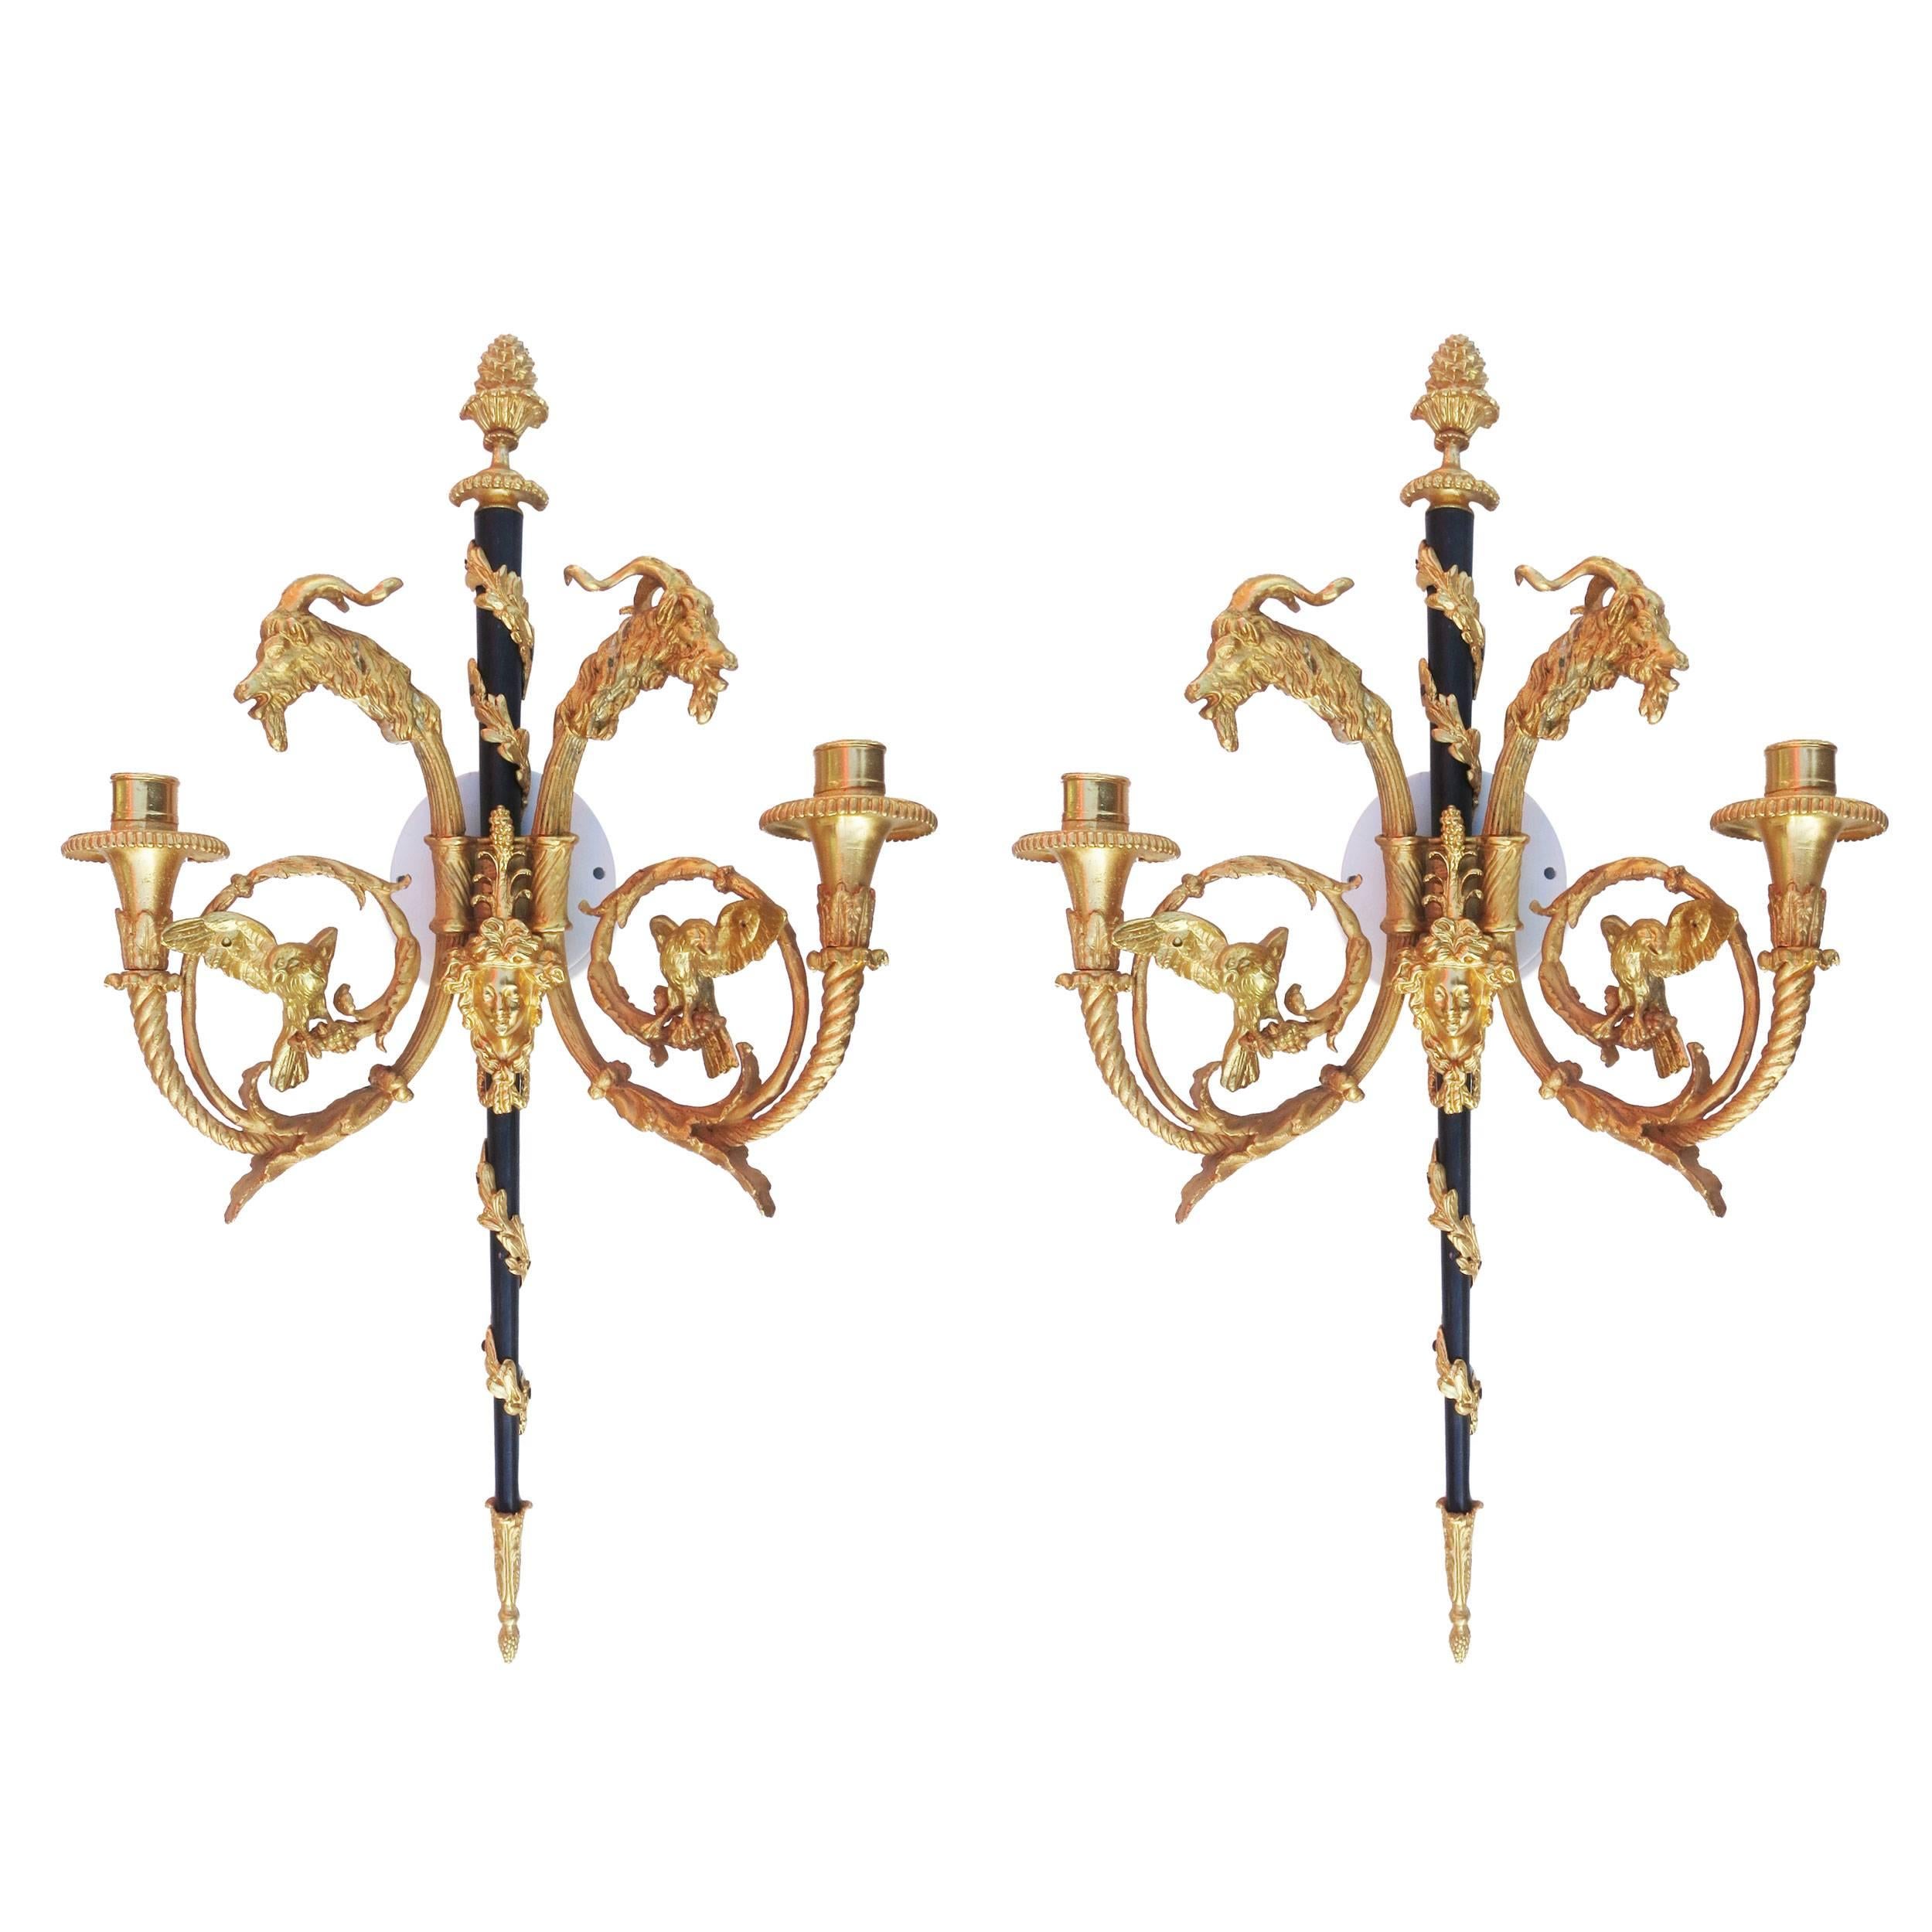 Empire style 24-karat plated bronze candle stick wall sconce pair with goat heads in the front center and two heavily decorated arms.

***No wiring for candles only*****

Product handcrafted in the USA with the highest quality materials and over 30